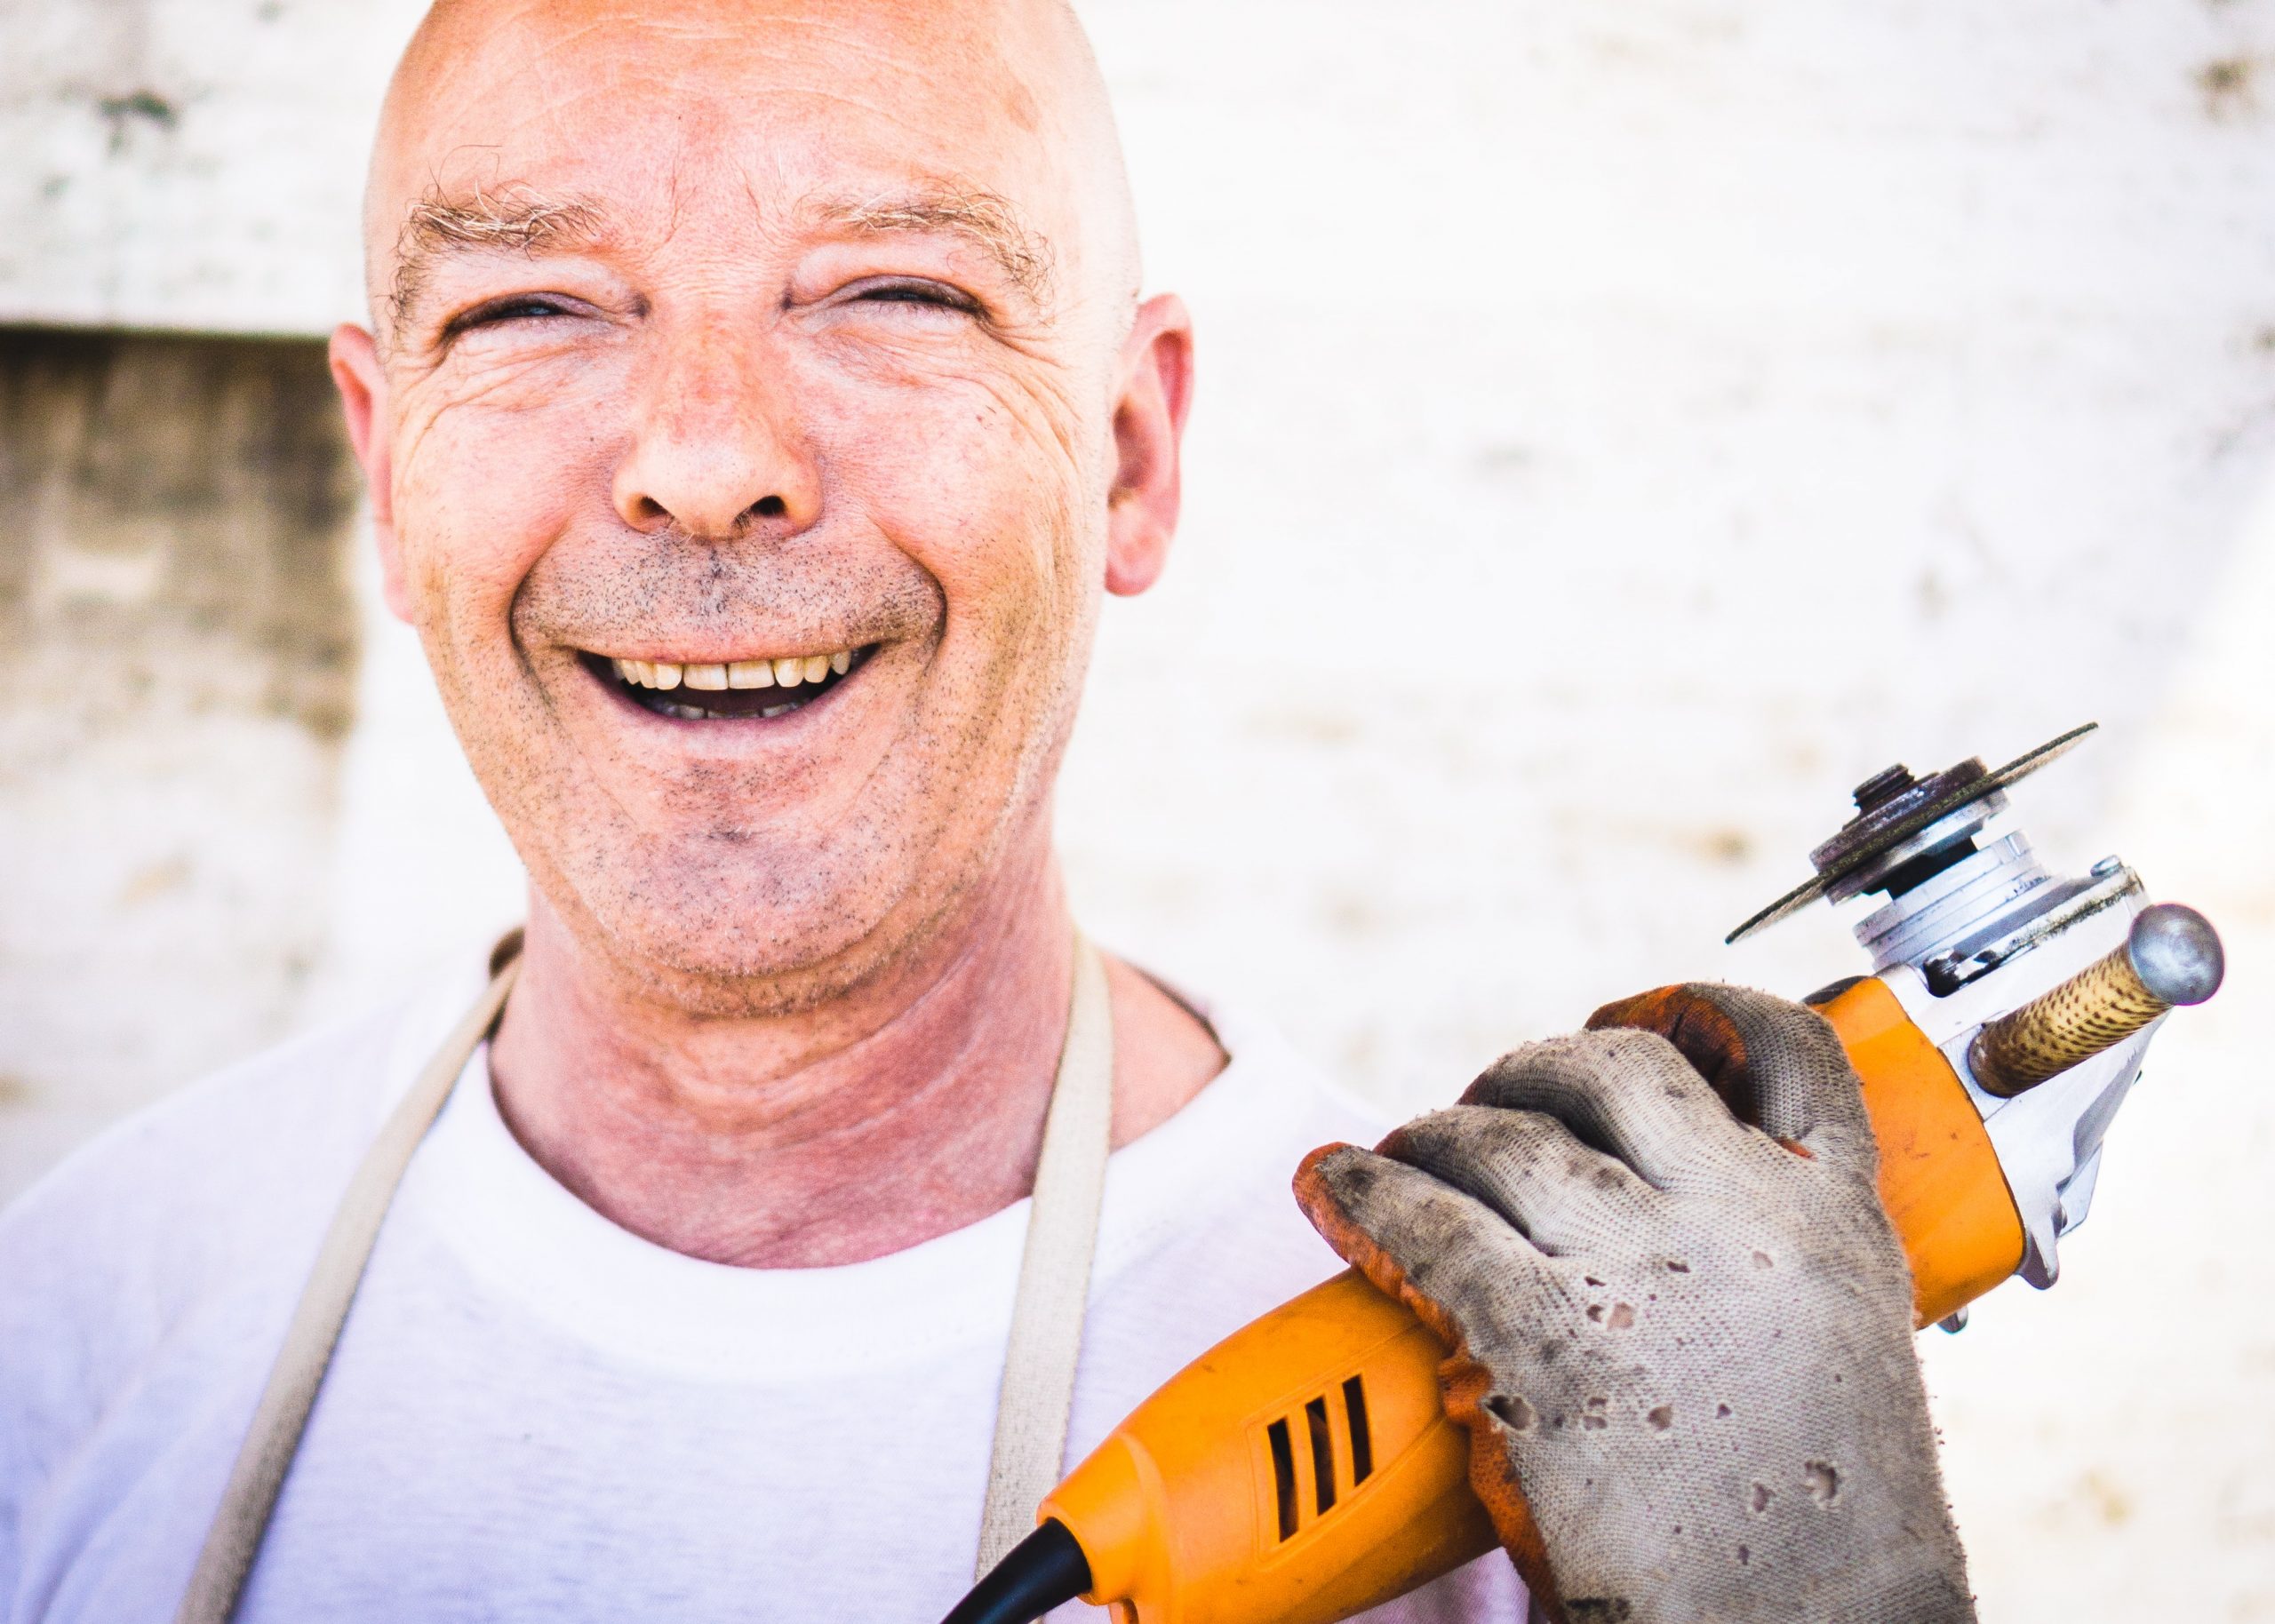 A man smiles, holding a drill and looks directly at the camera.